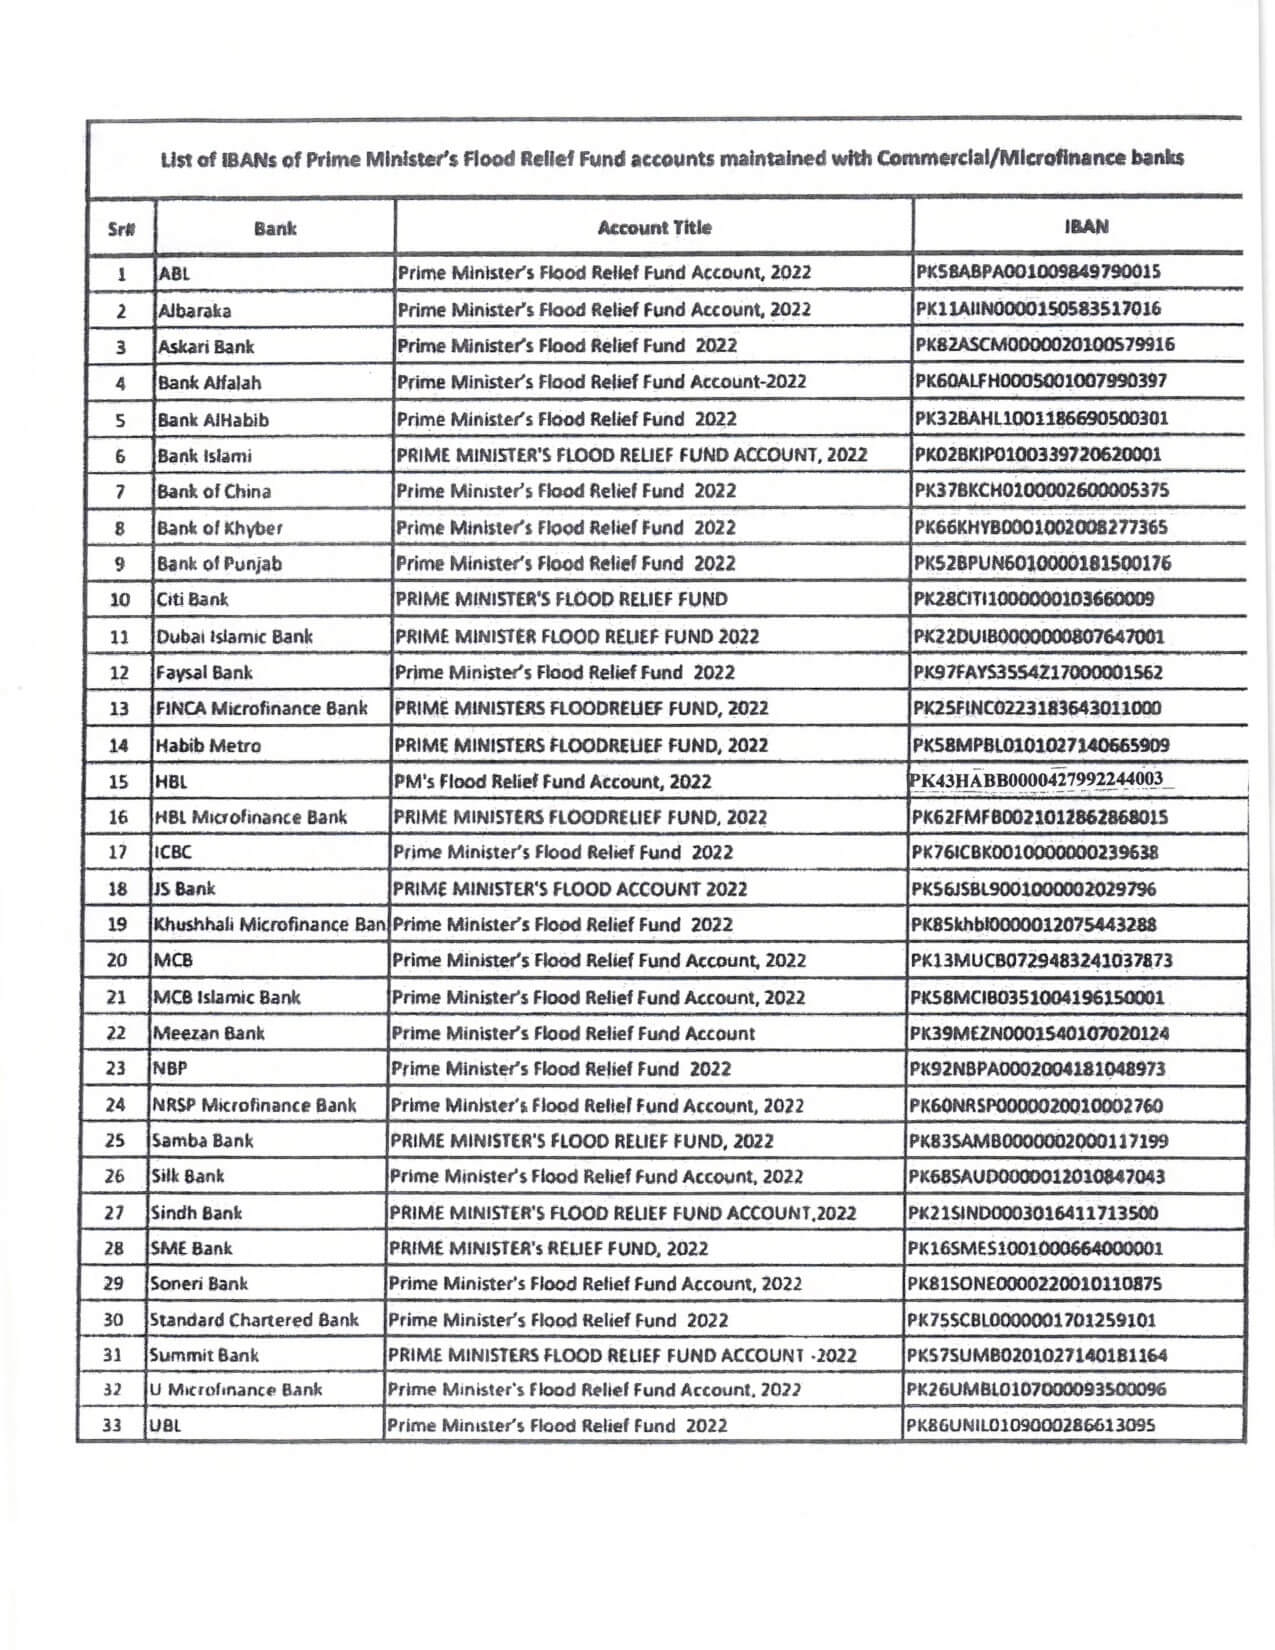 List of Bank Accounts of Prime Minister Flood Relief Accounts for Flood Relief in 2022